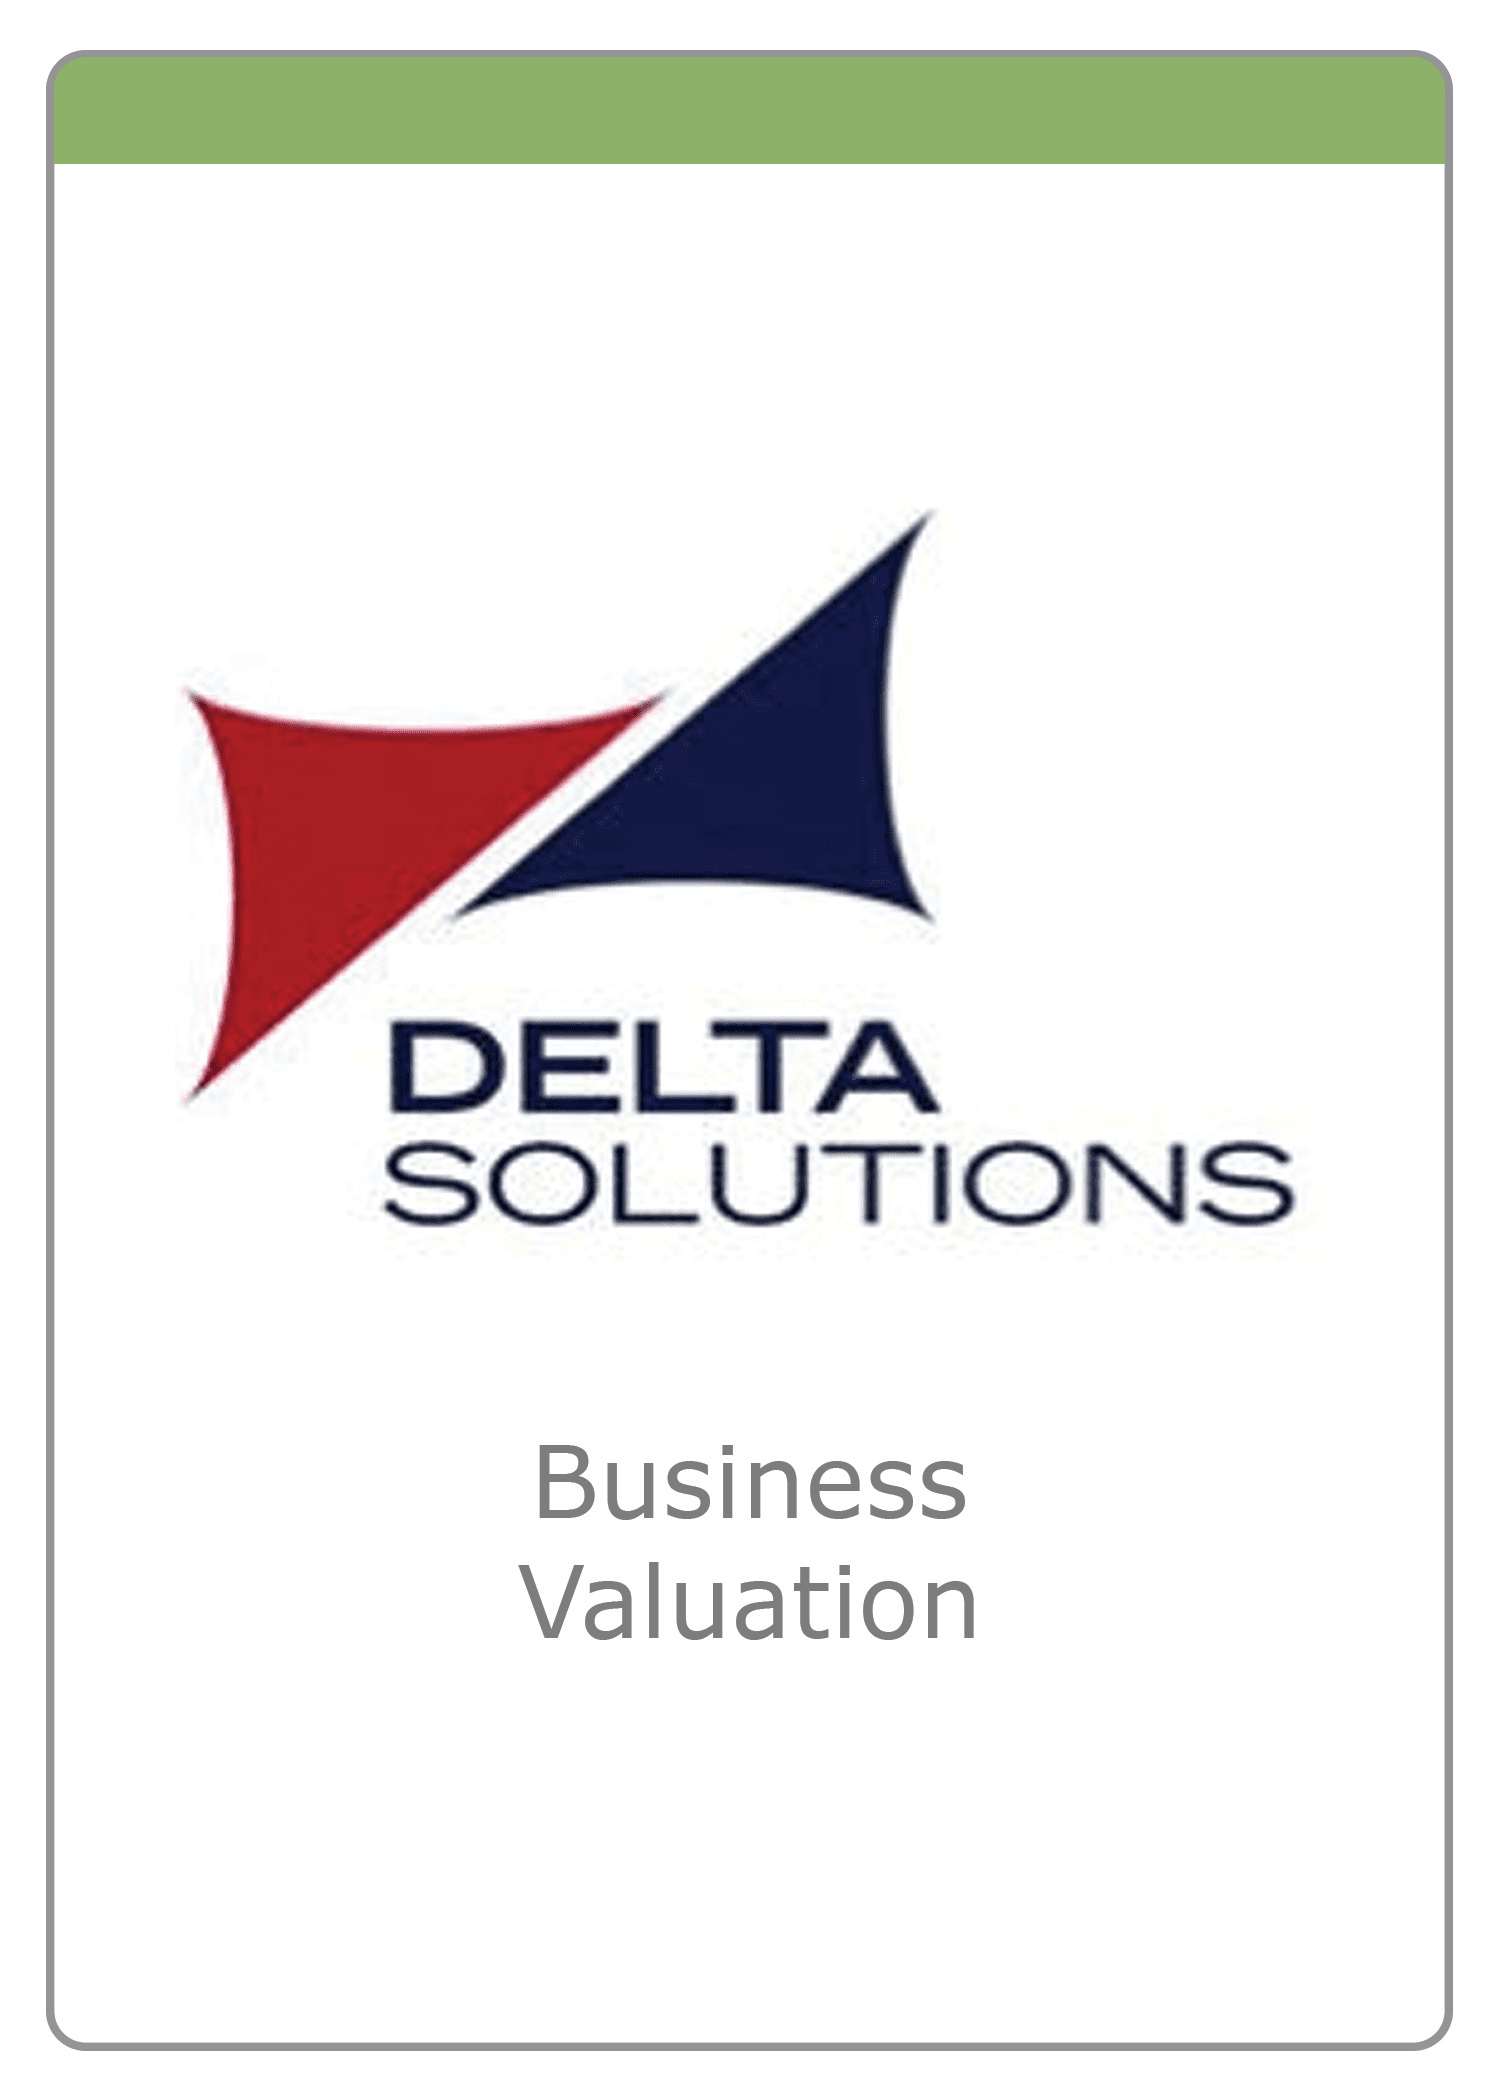 Delta Solutions ESOP - The McLean Group